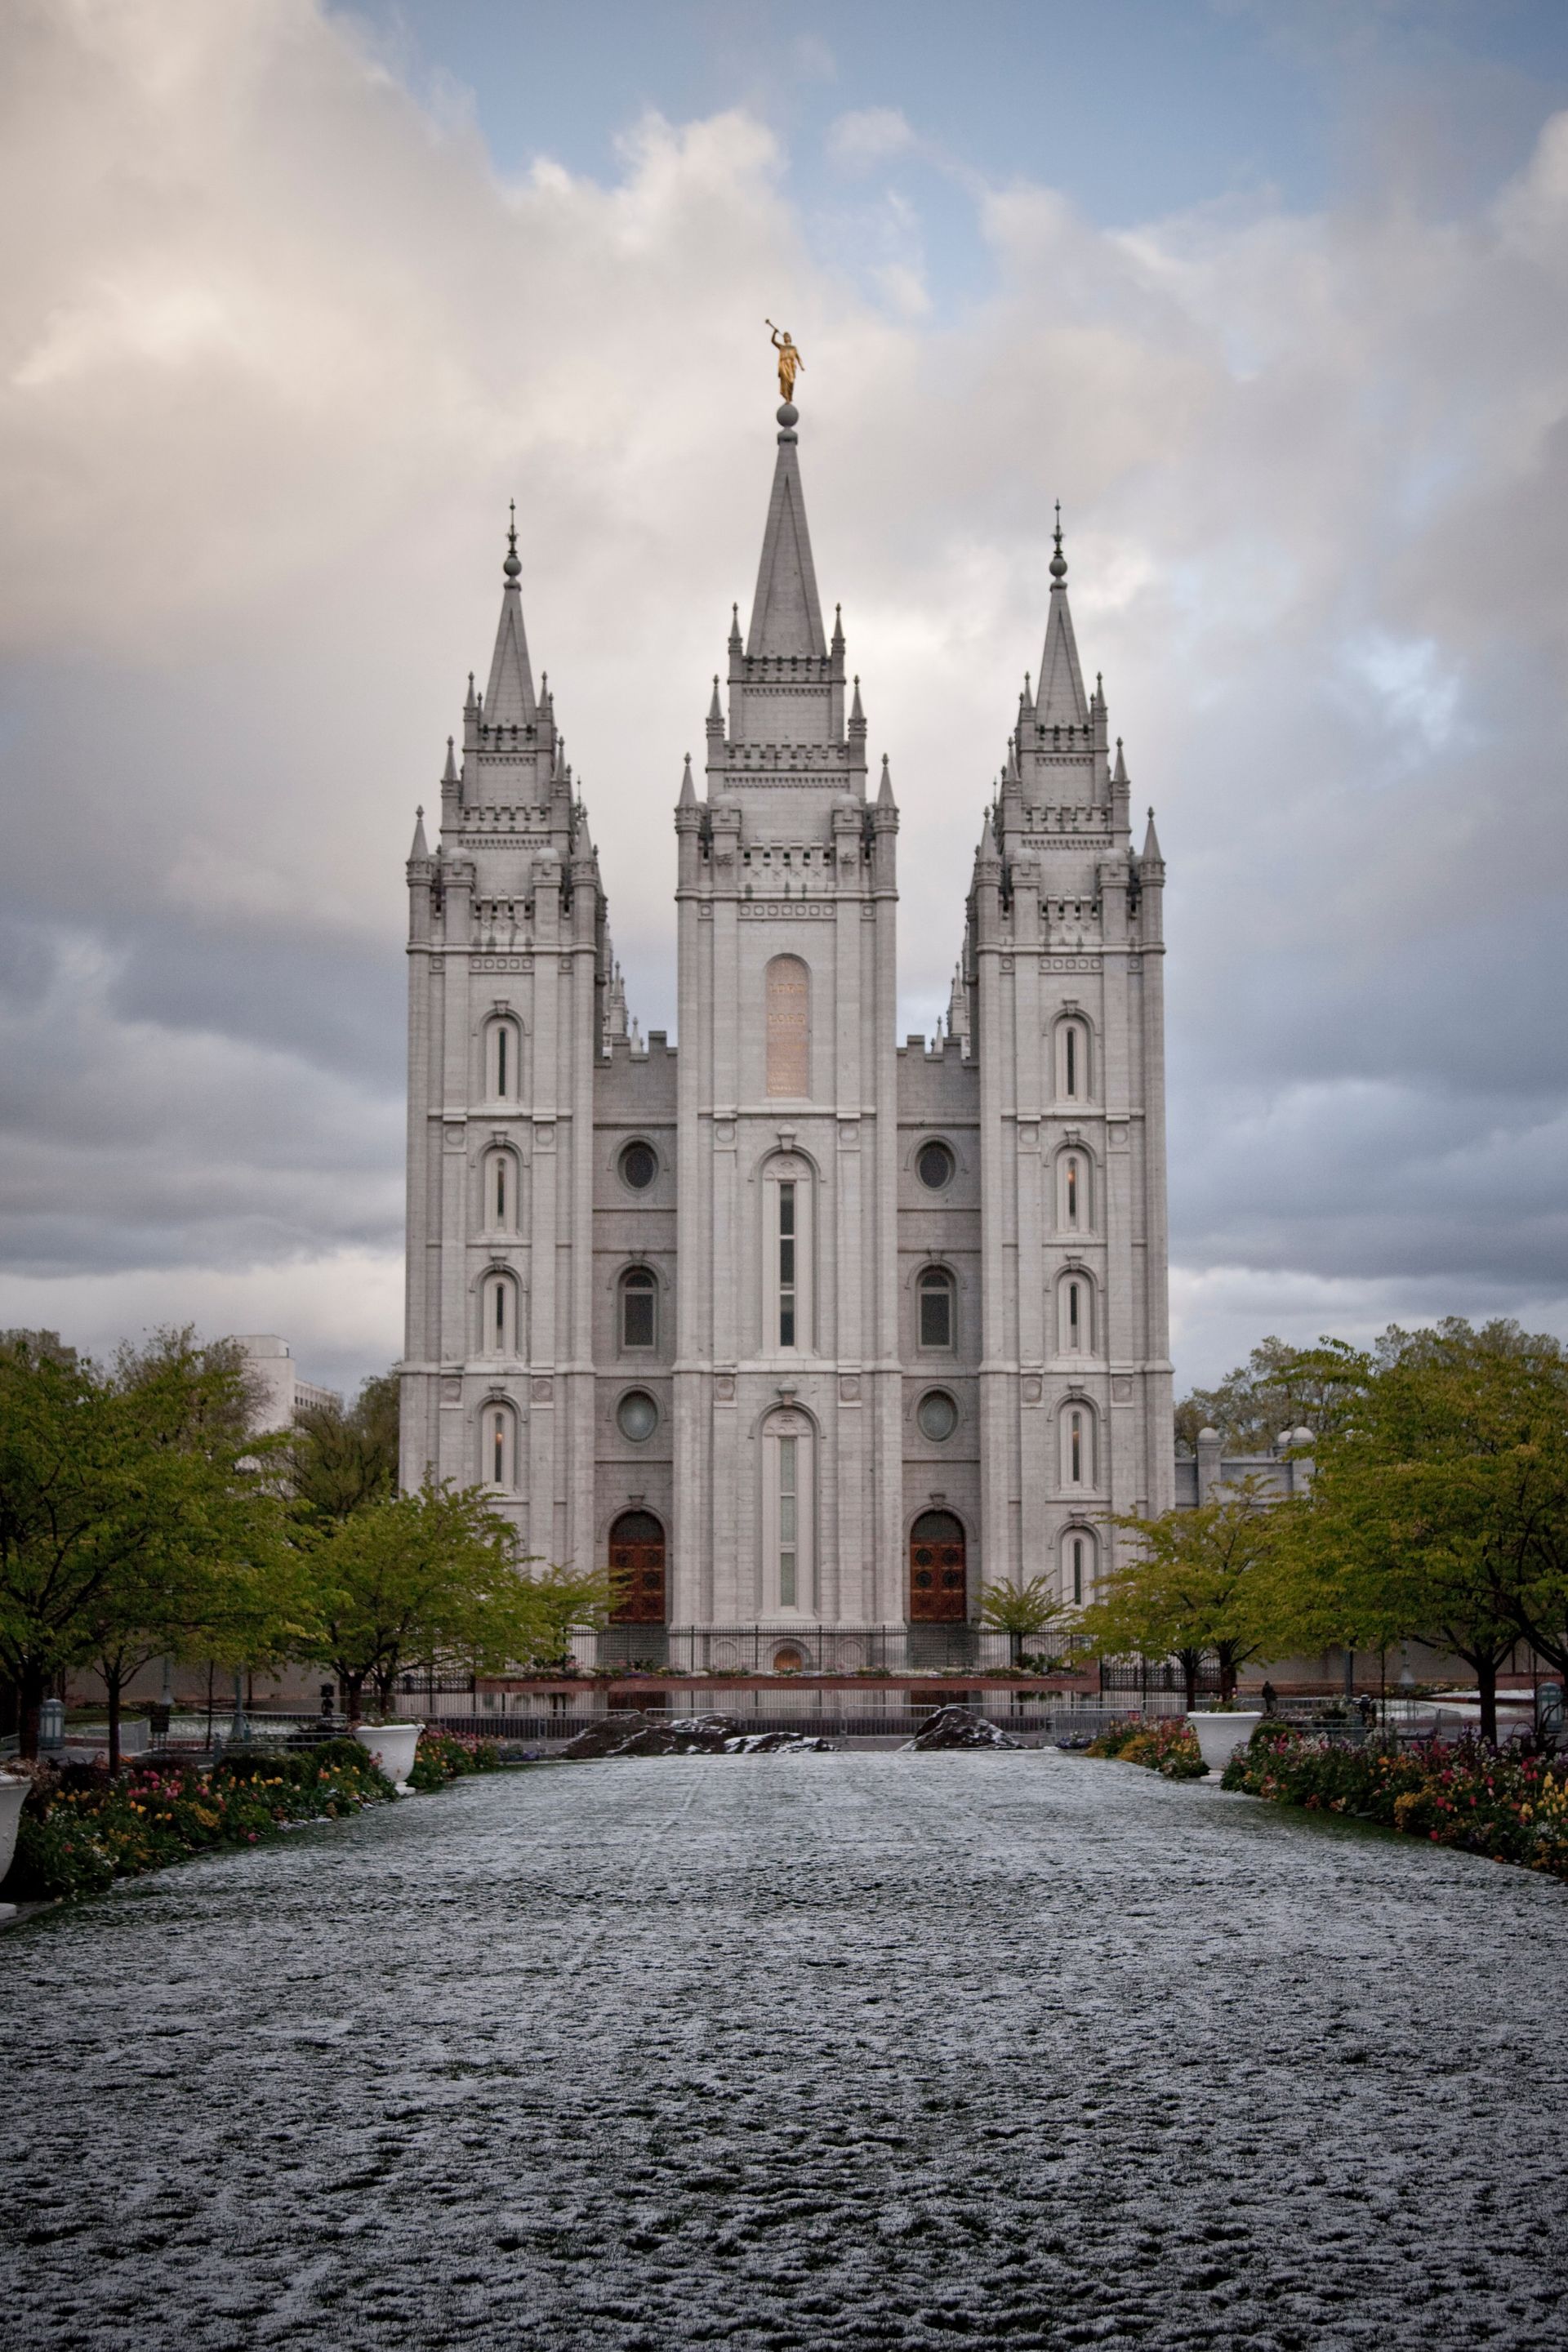 The entire Salt Lake Temple in the winter, including scenery.